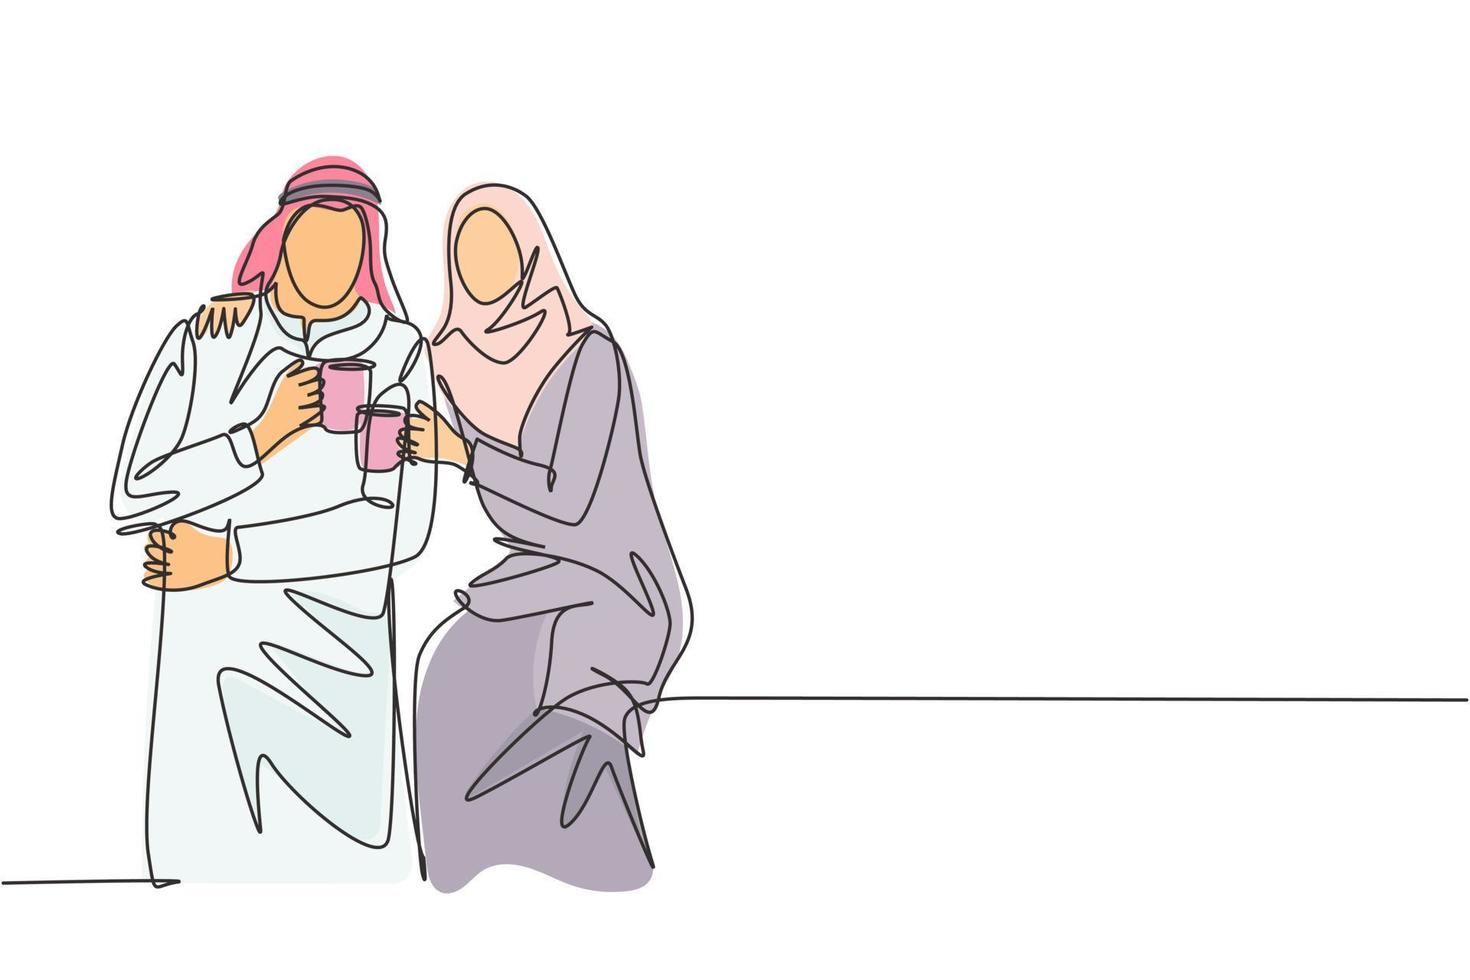 One continuous line drawing of young muslim and muslimah couple pose romantic together while holding a cup of coffee. Islamic clothing shmagh, kandura, scarf. Single line draw design illustration vector